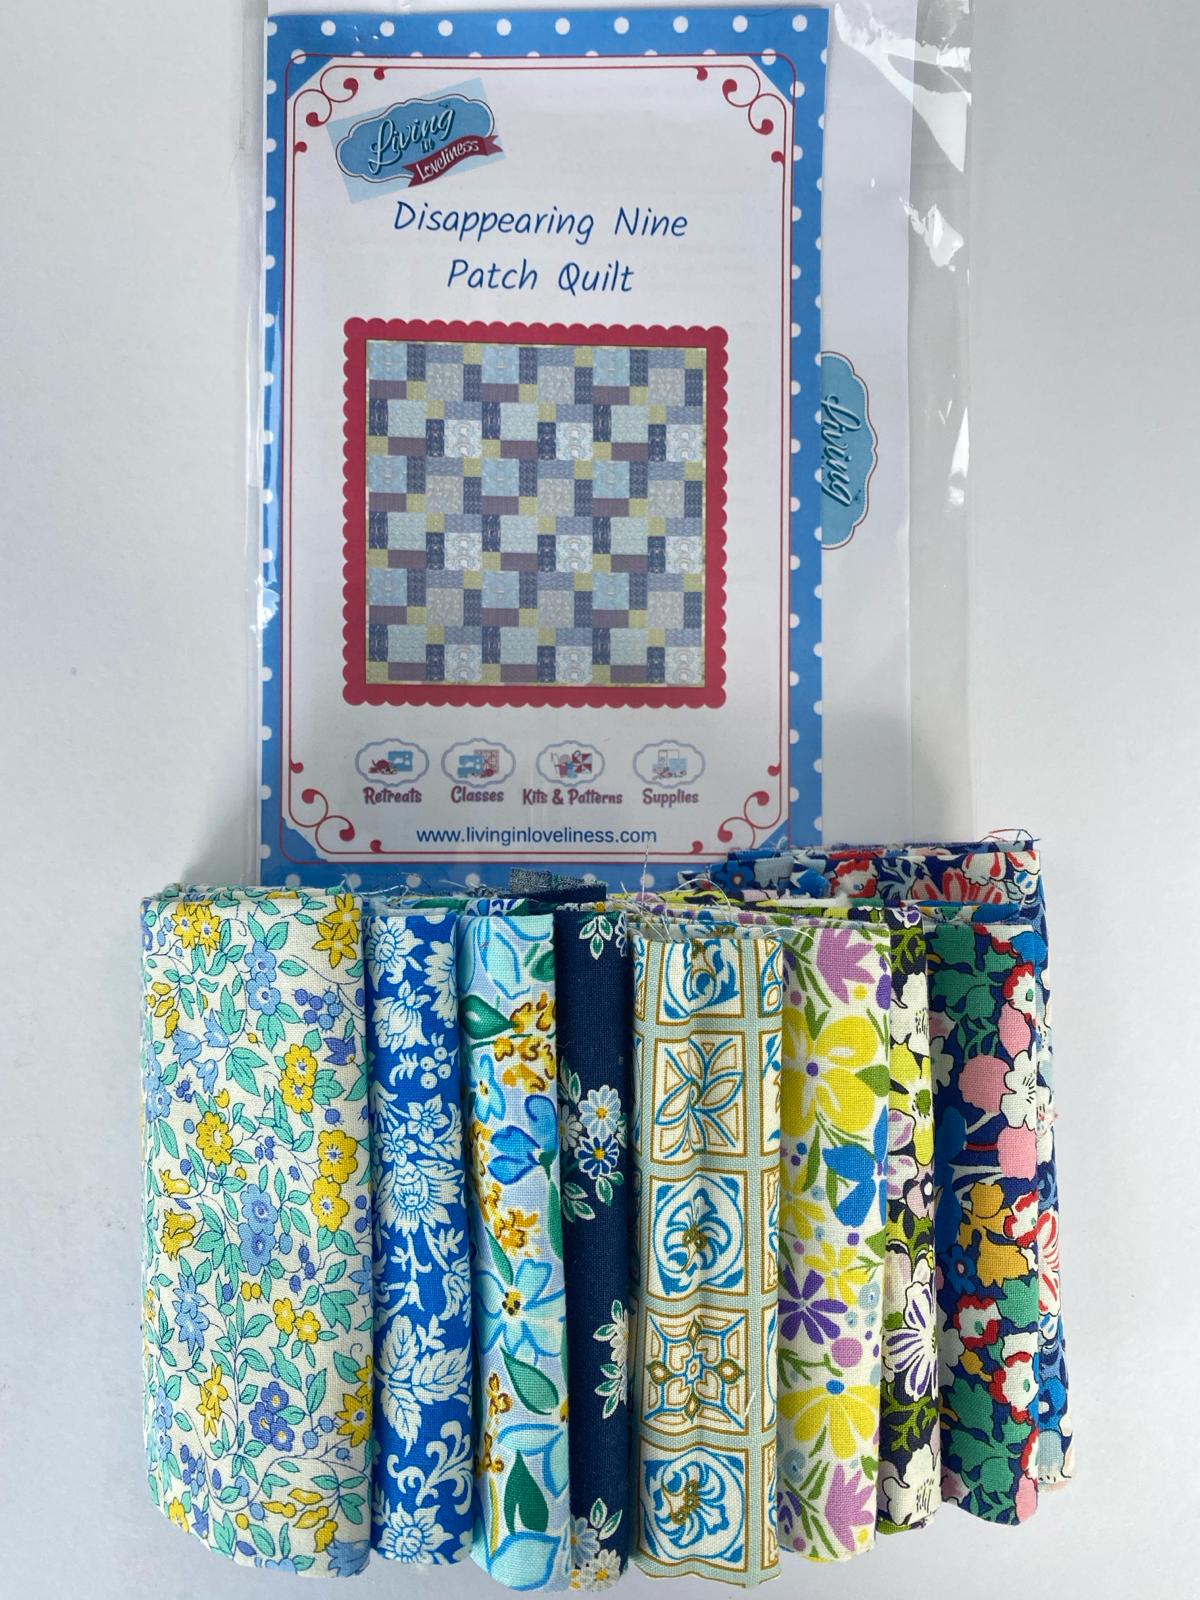 Living in Loveliness Disappearing Nine Patch Quilt Kit